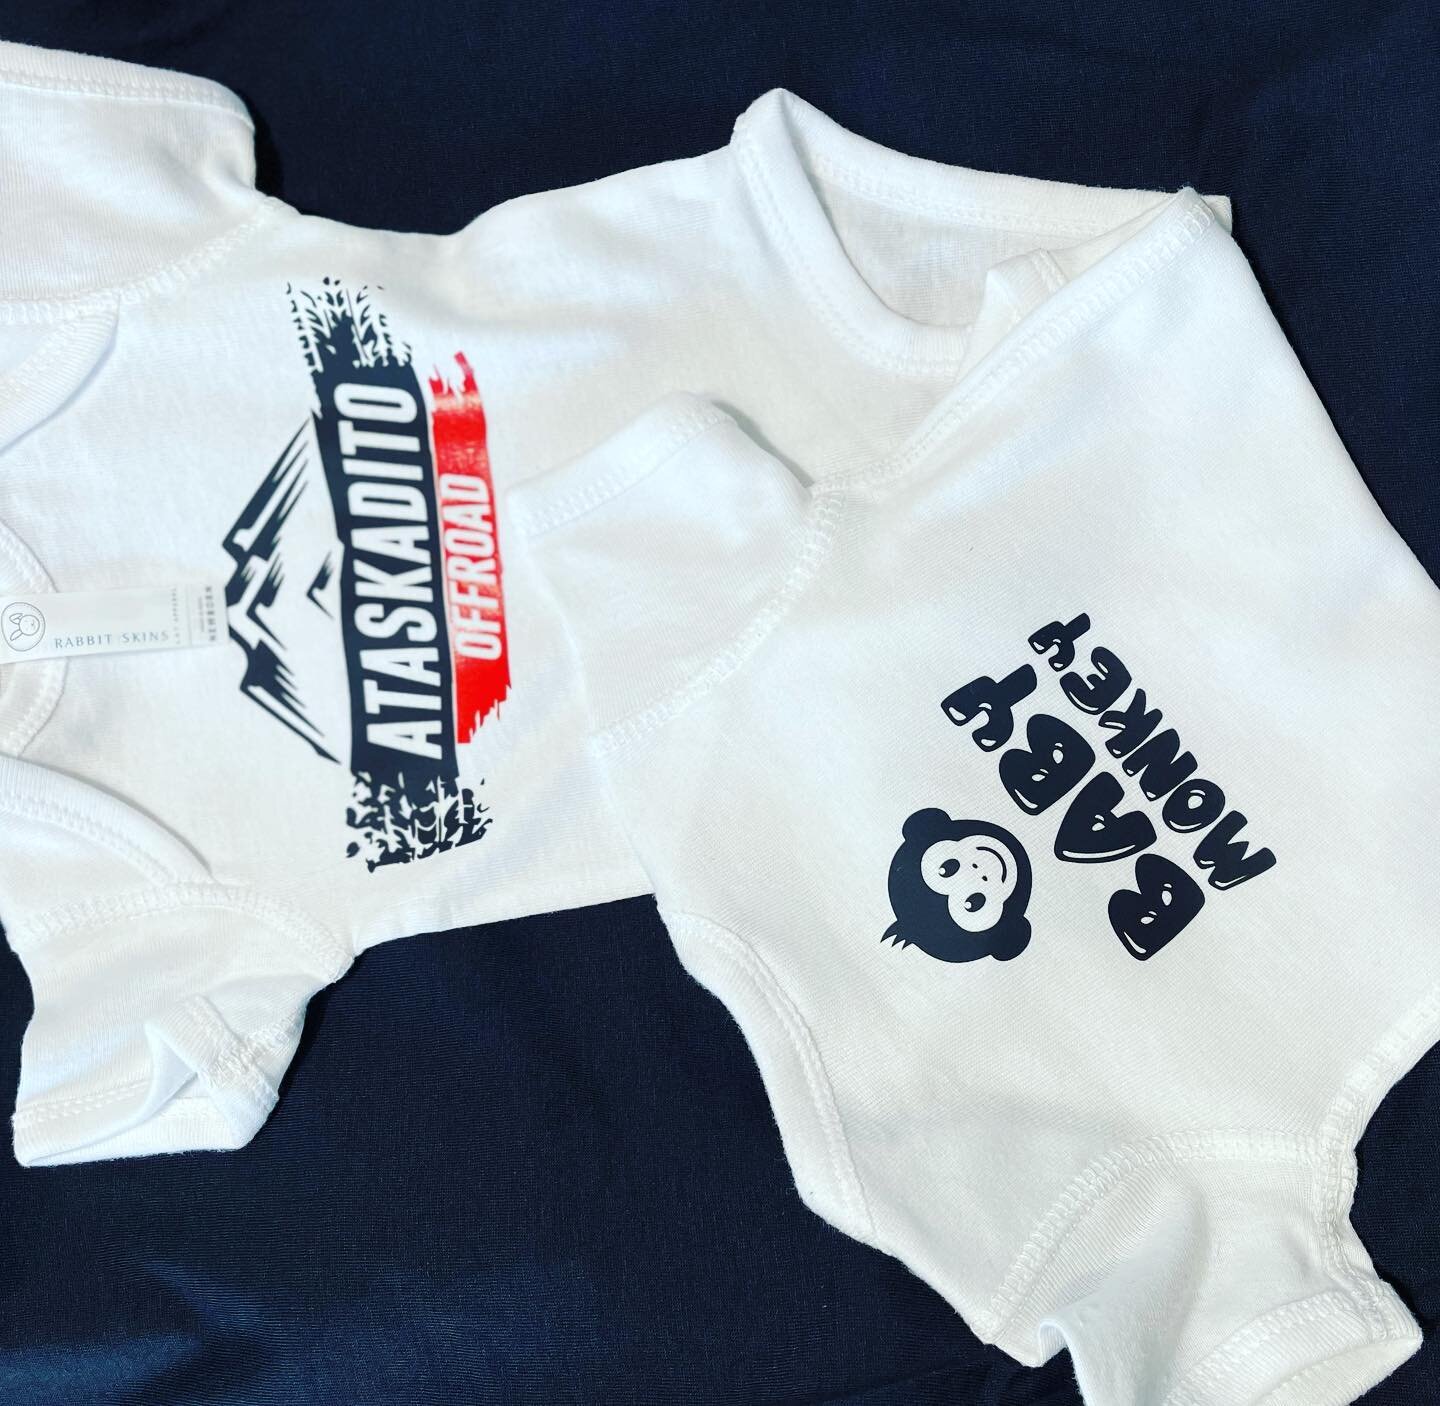 Ataskadito project for one of our favorite customers @alteihc #offroad #babyapparel #customdesignapparel